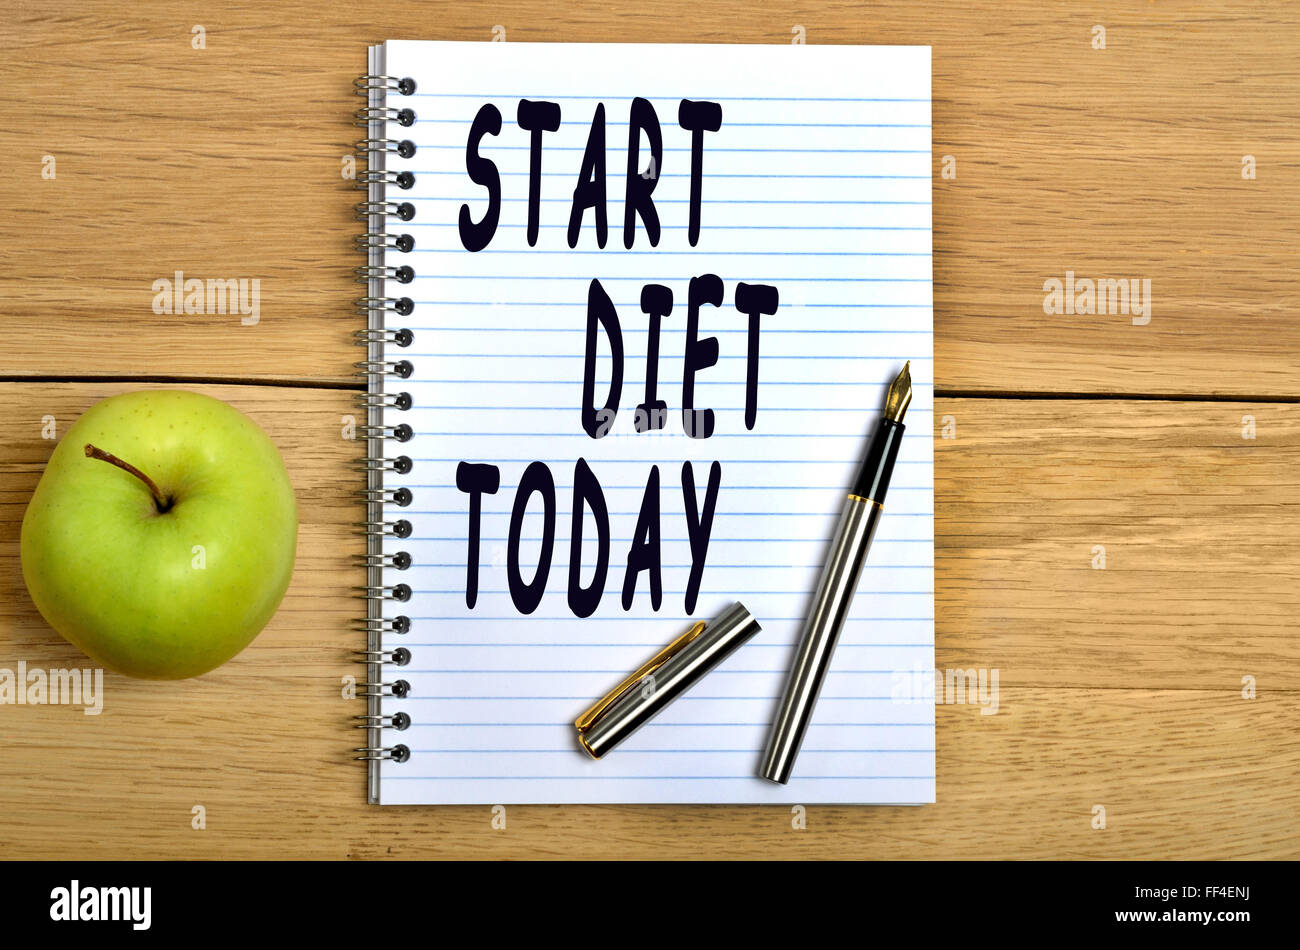 Start diet today text on notebook Stock Photo